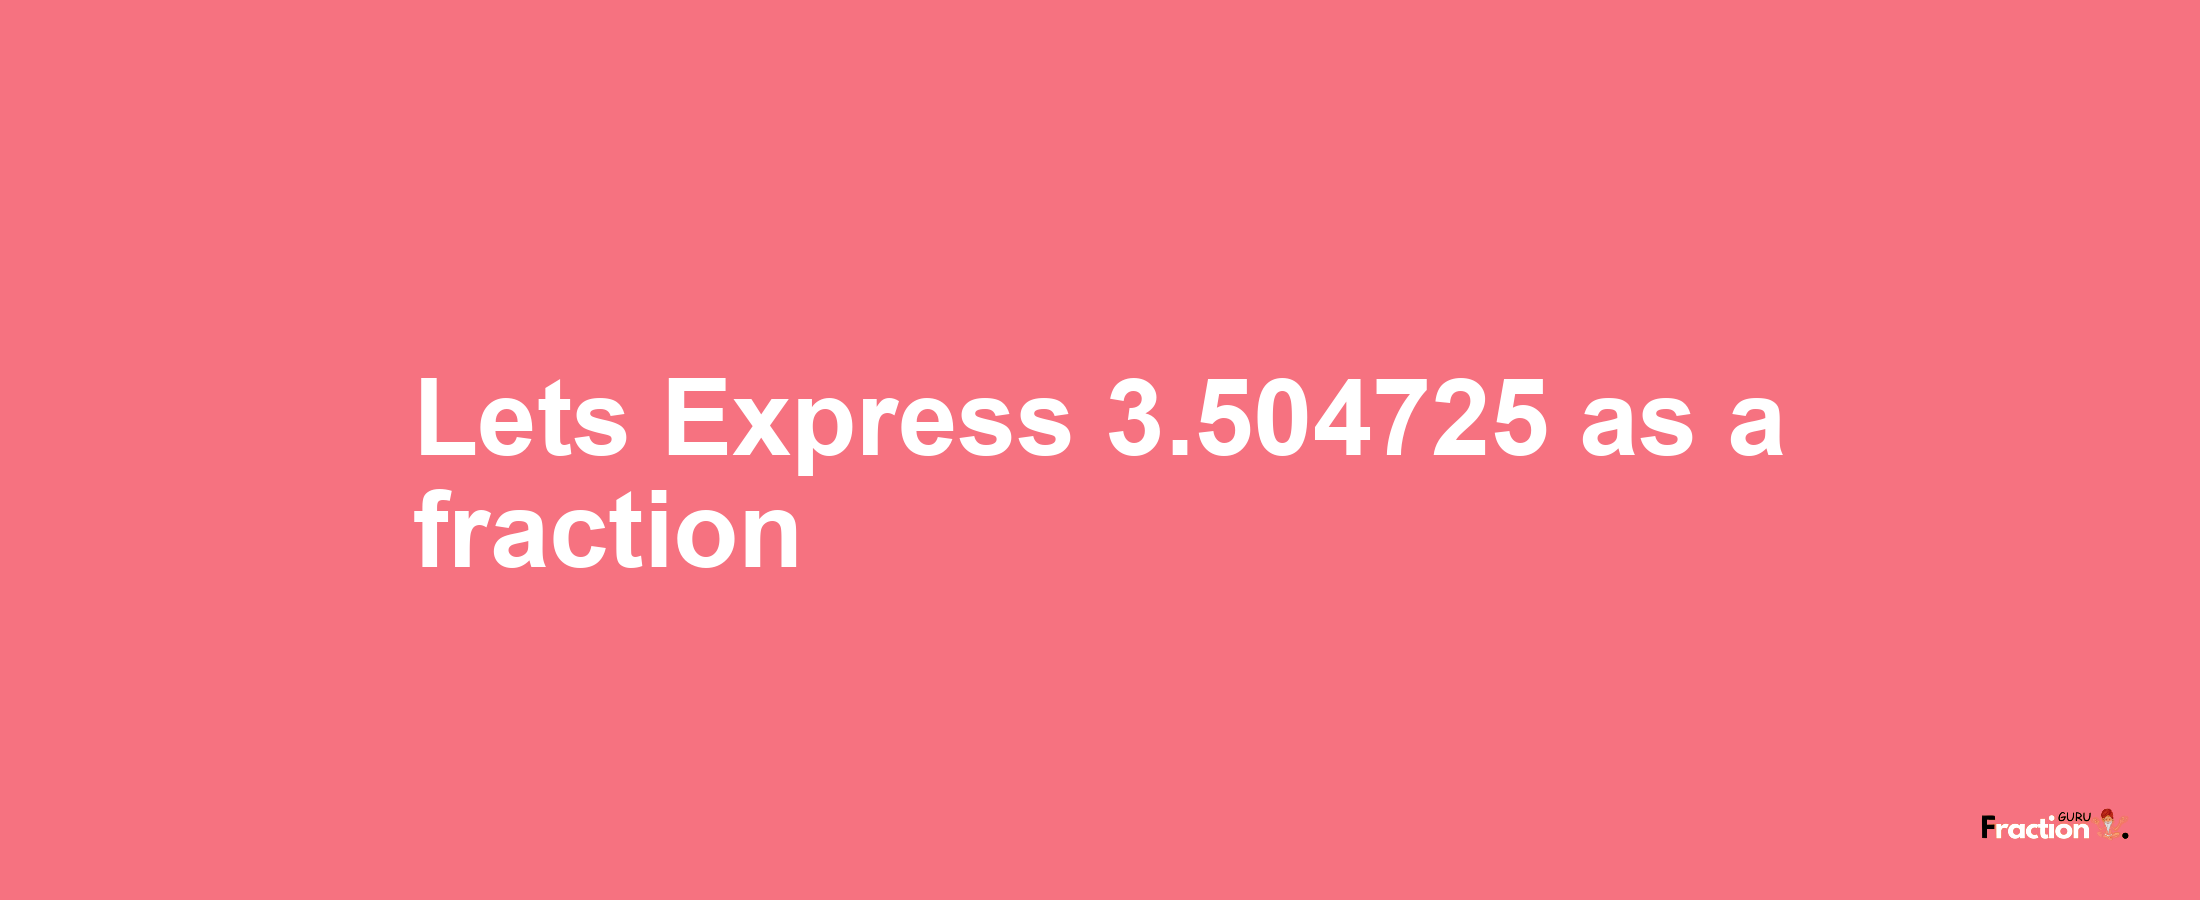 Lets Express 3.504725 as afraction